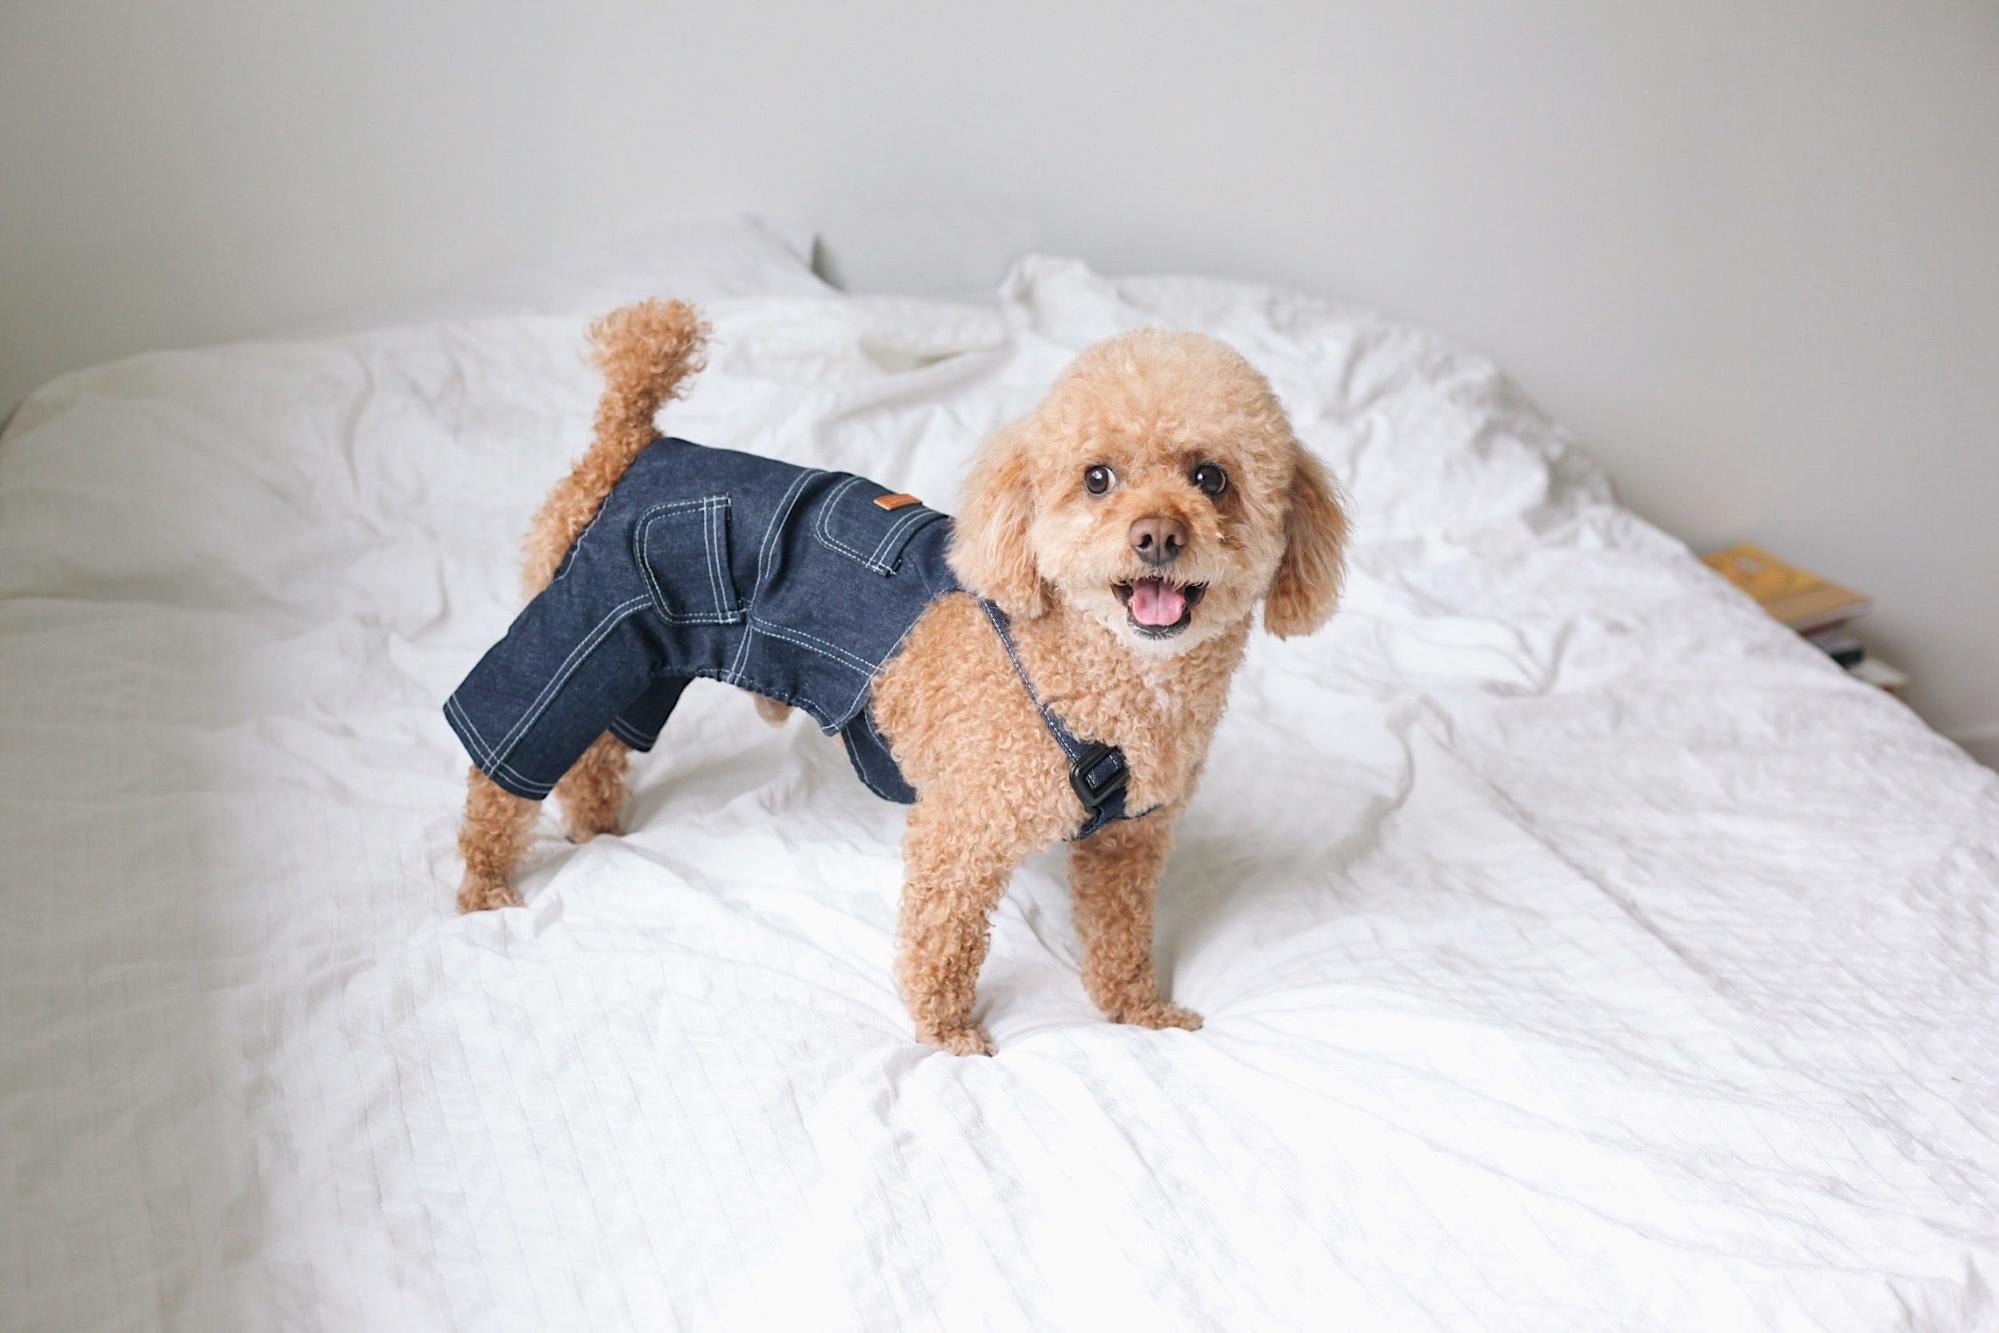 A small dog wearing overalls standing on a bed.